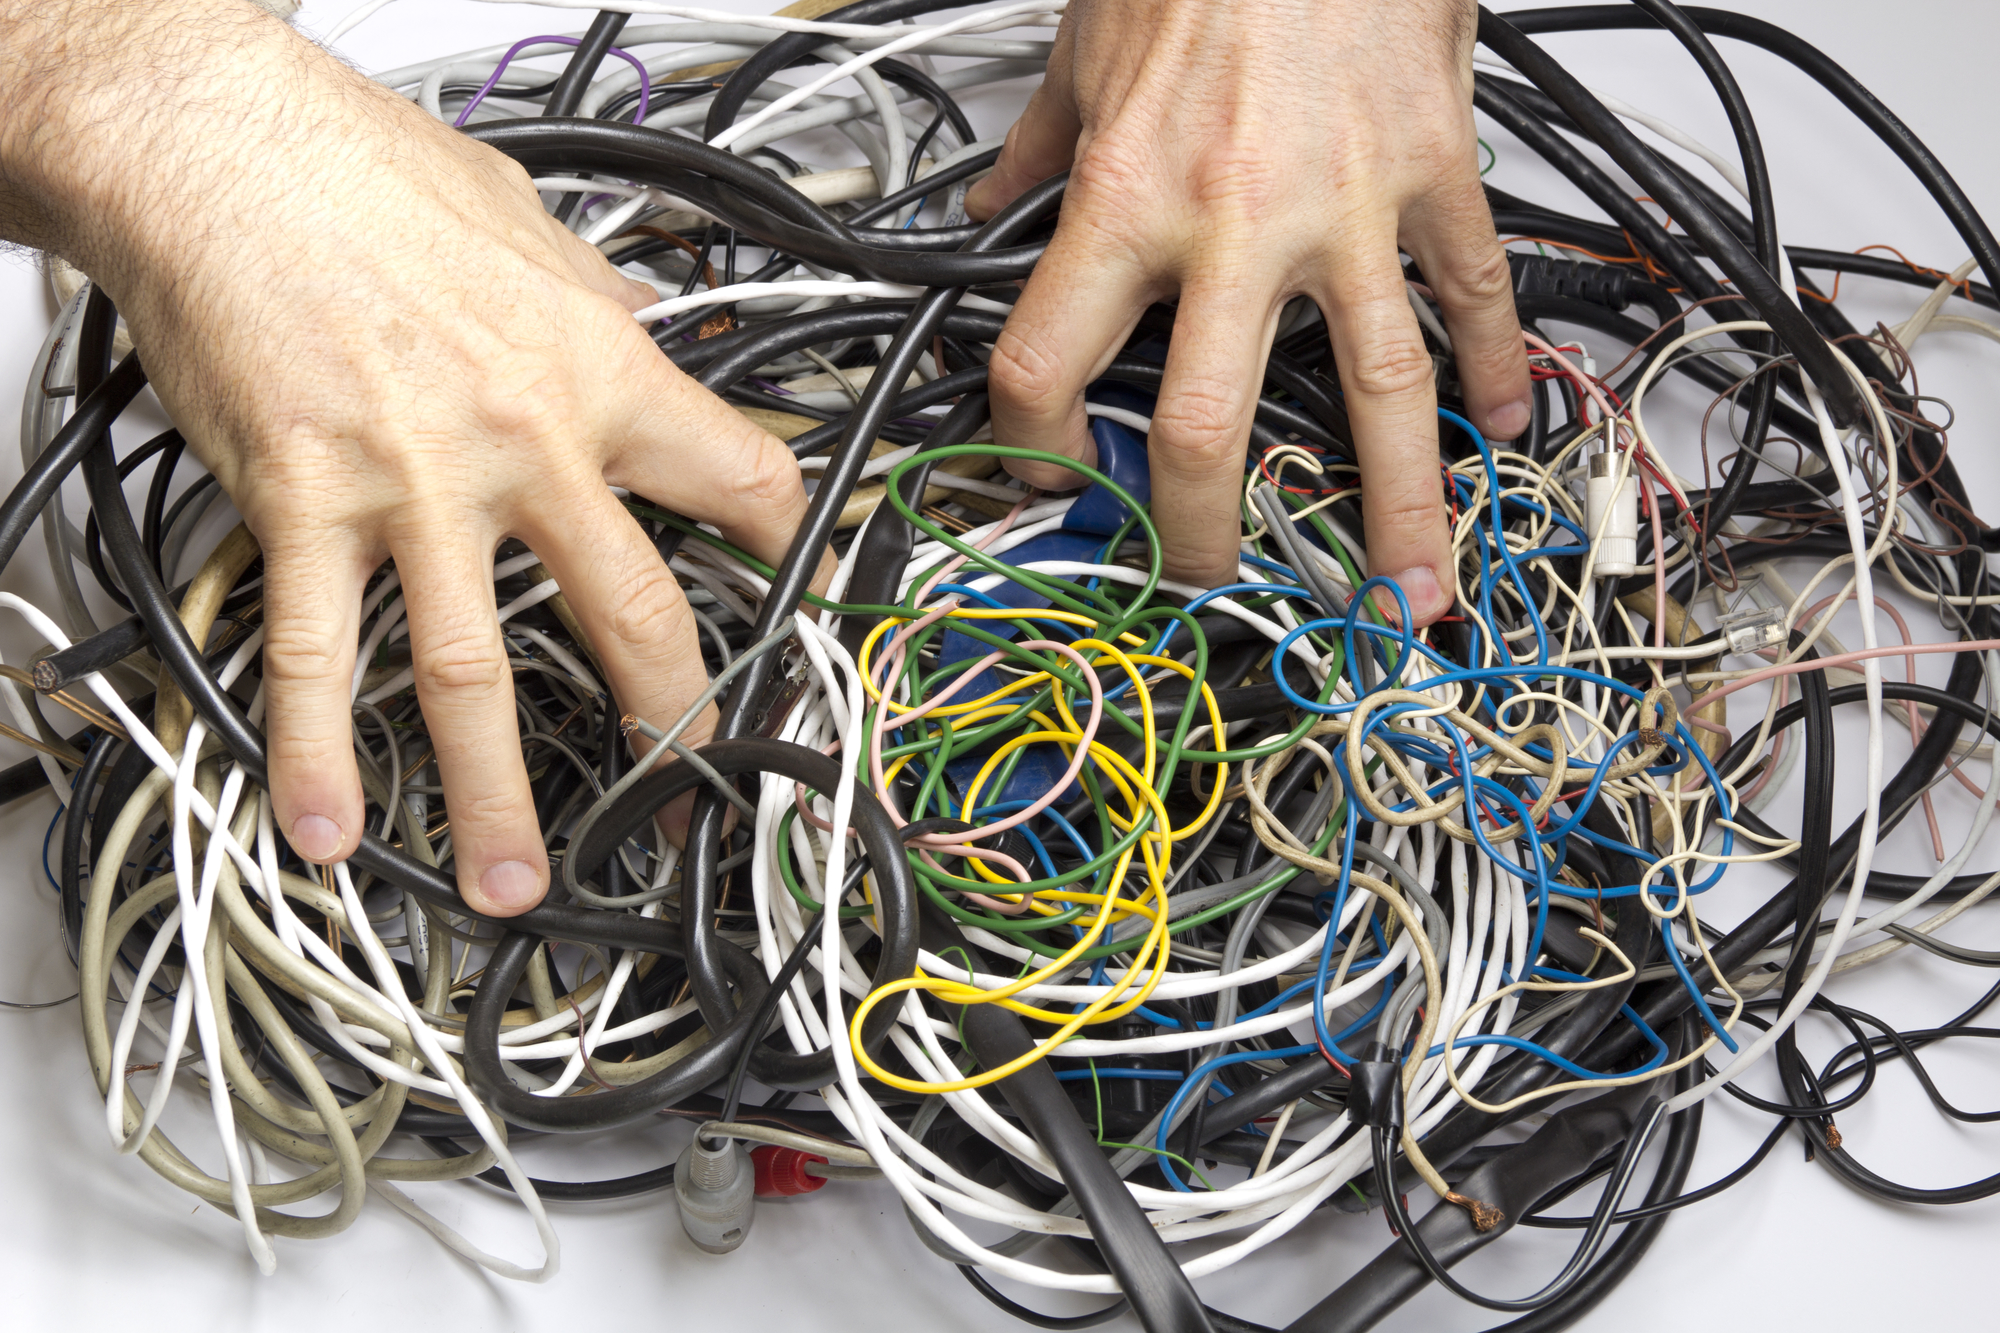 Recycle Old Wires and Cables; They're Worth a Lot of $$! - Big Green ...